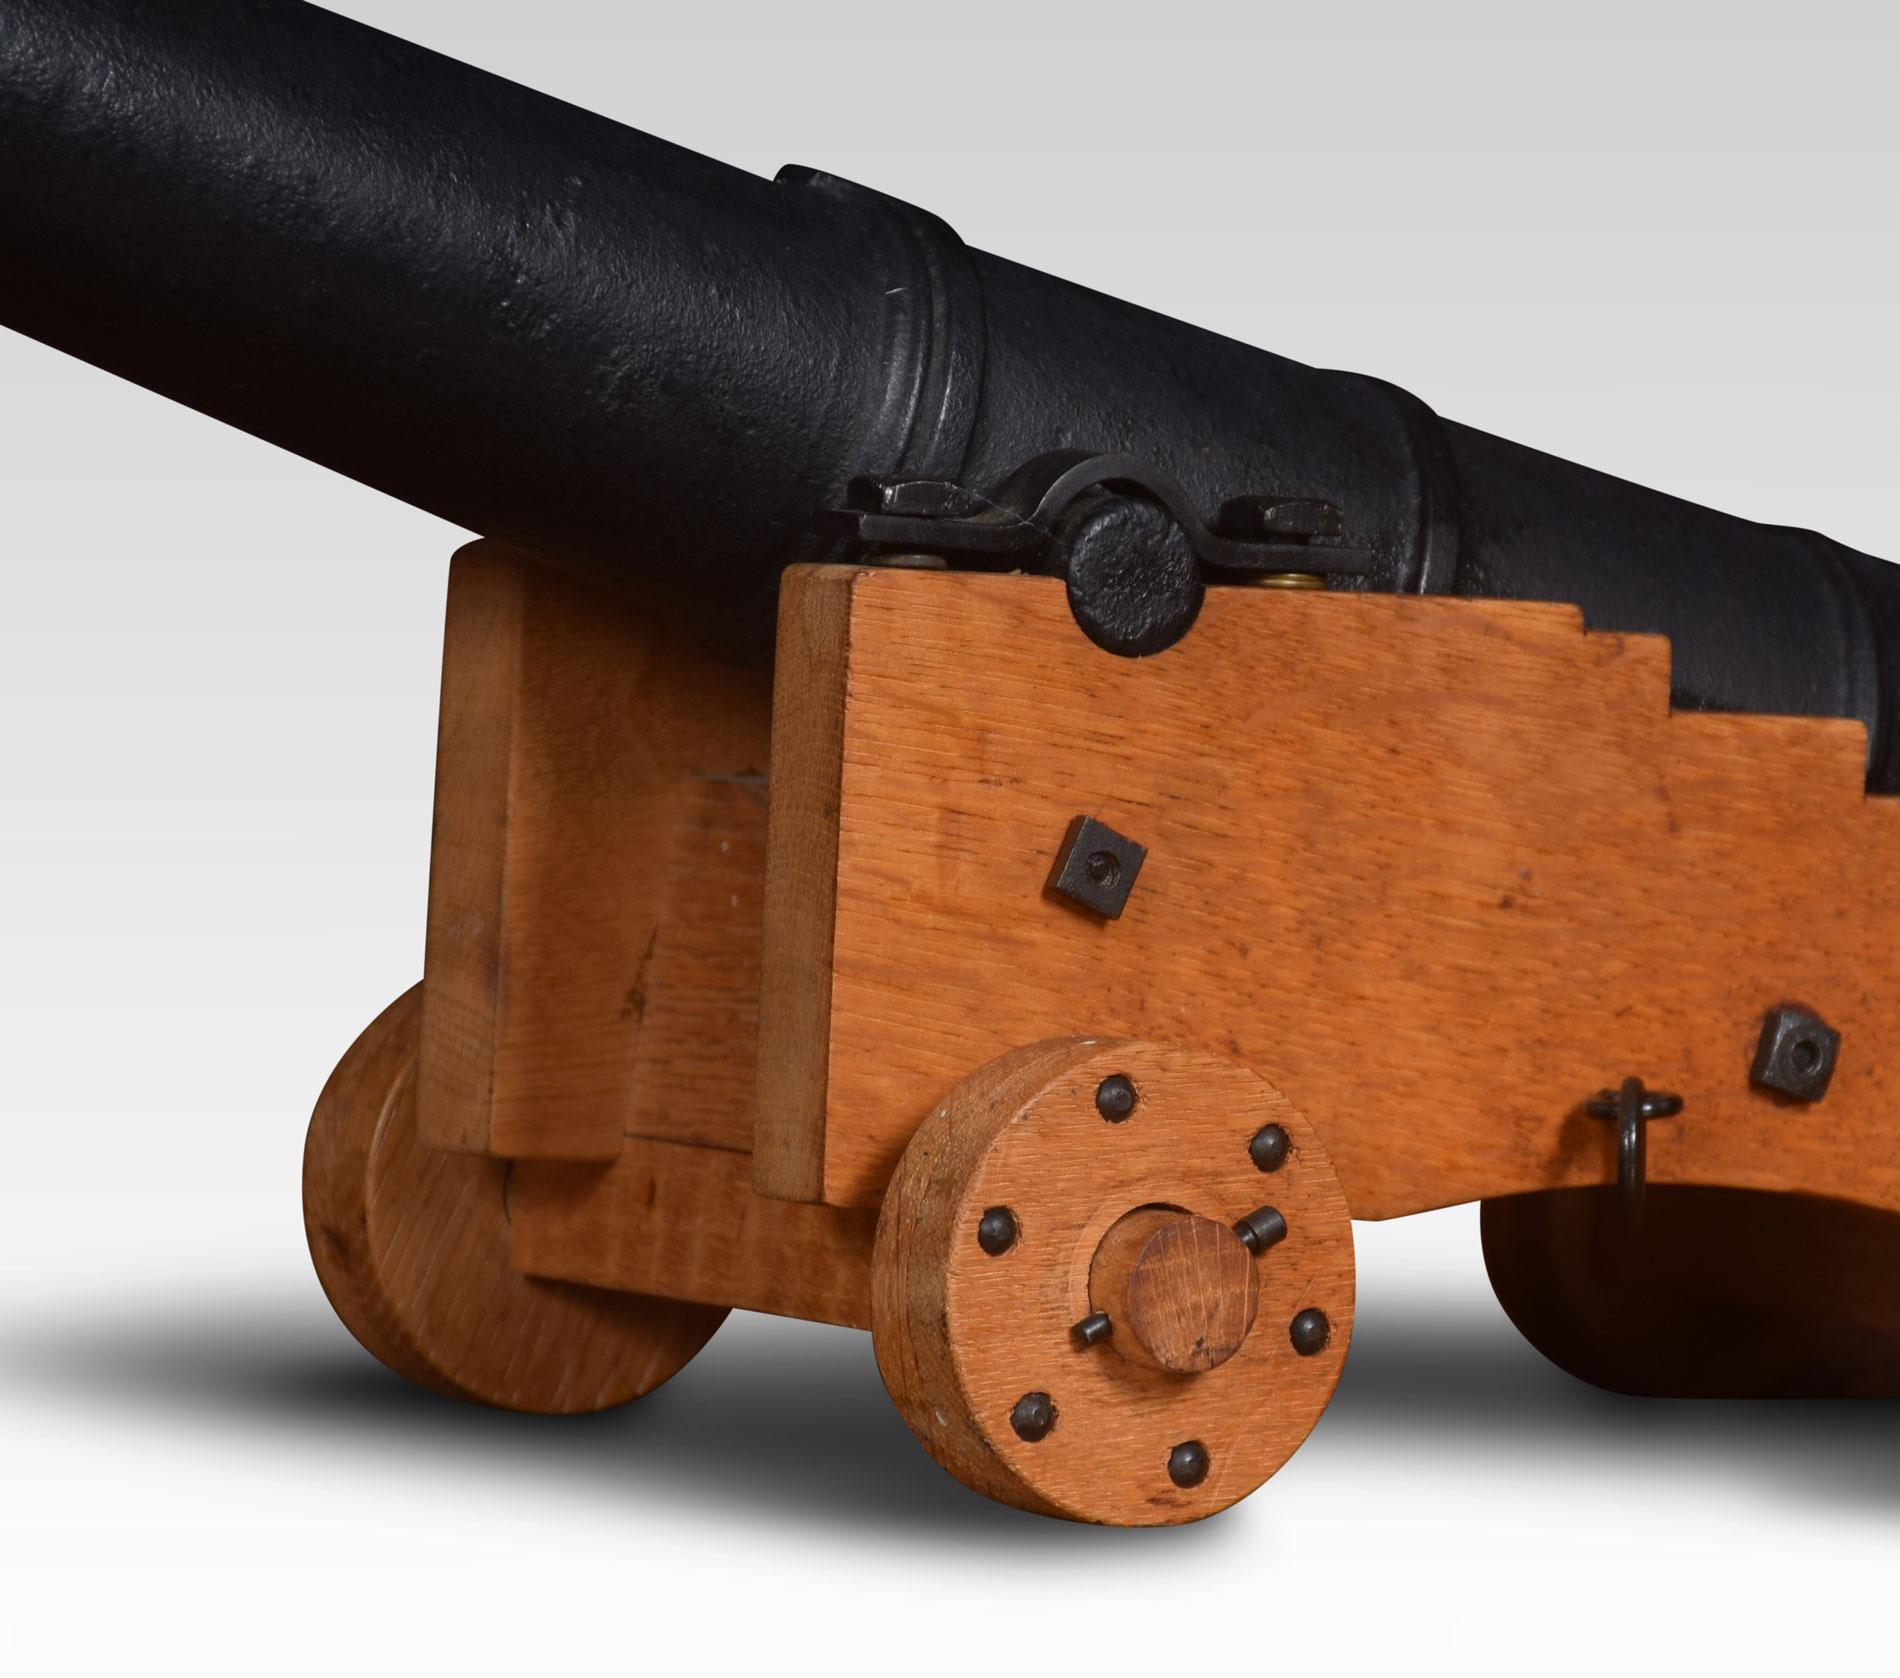 Cast iron signal cannon having 15.5 inch barrel on later oak carriage with working wheels.
Dimensions:
Height 8.5 inches
Length 15.5 inches
width 7 inches.